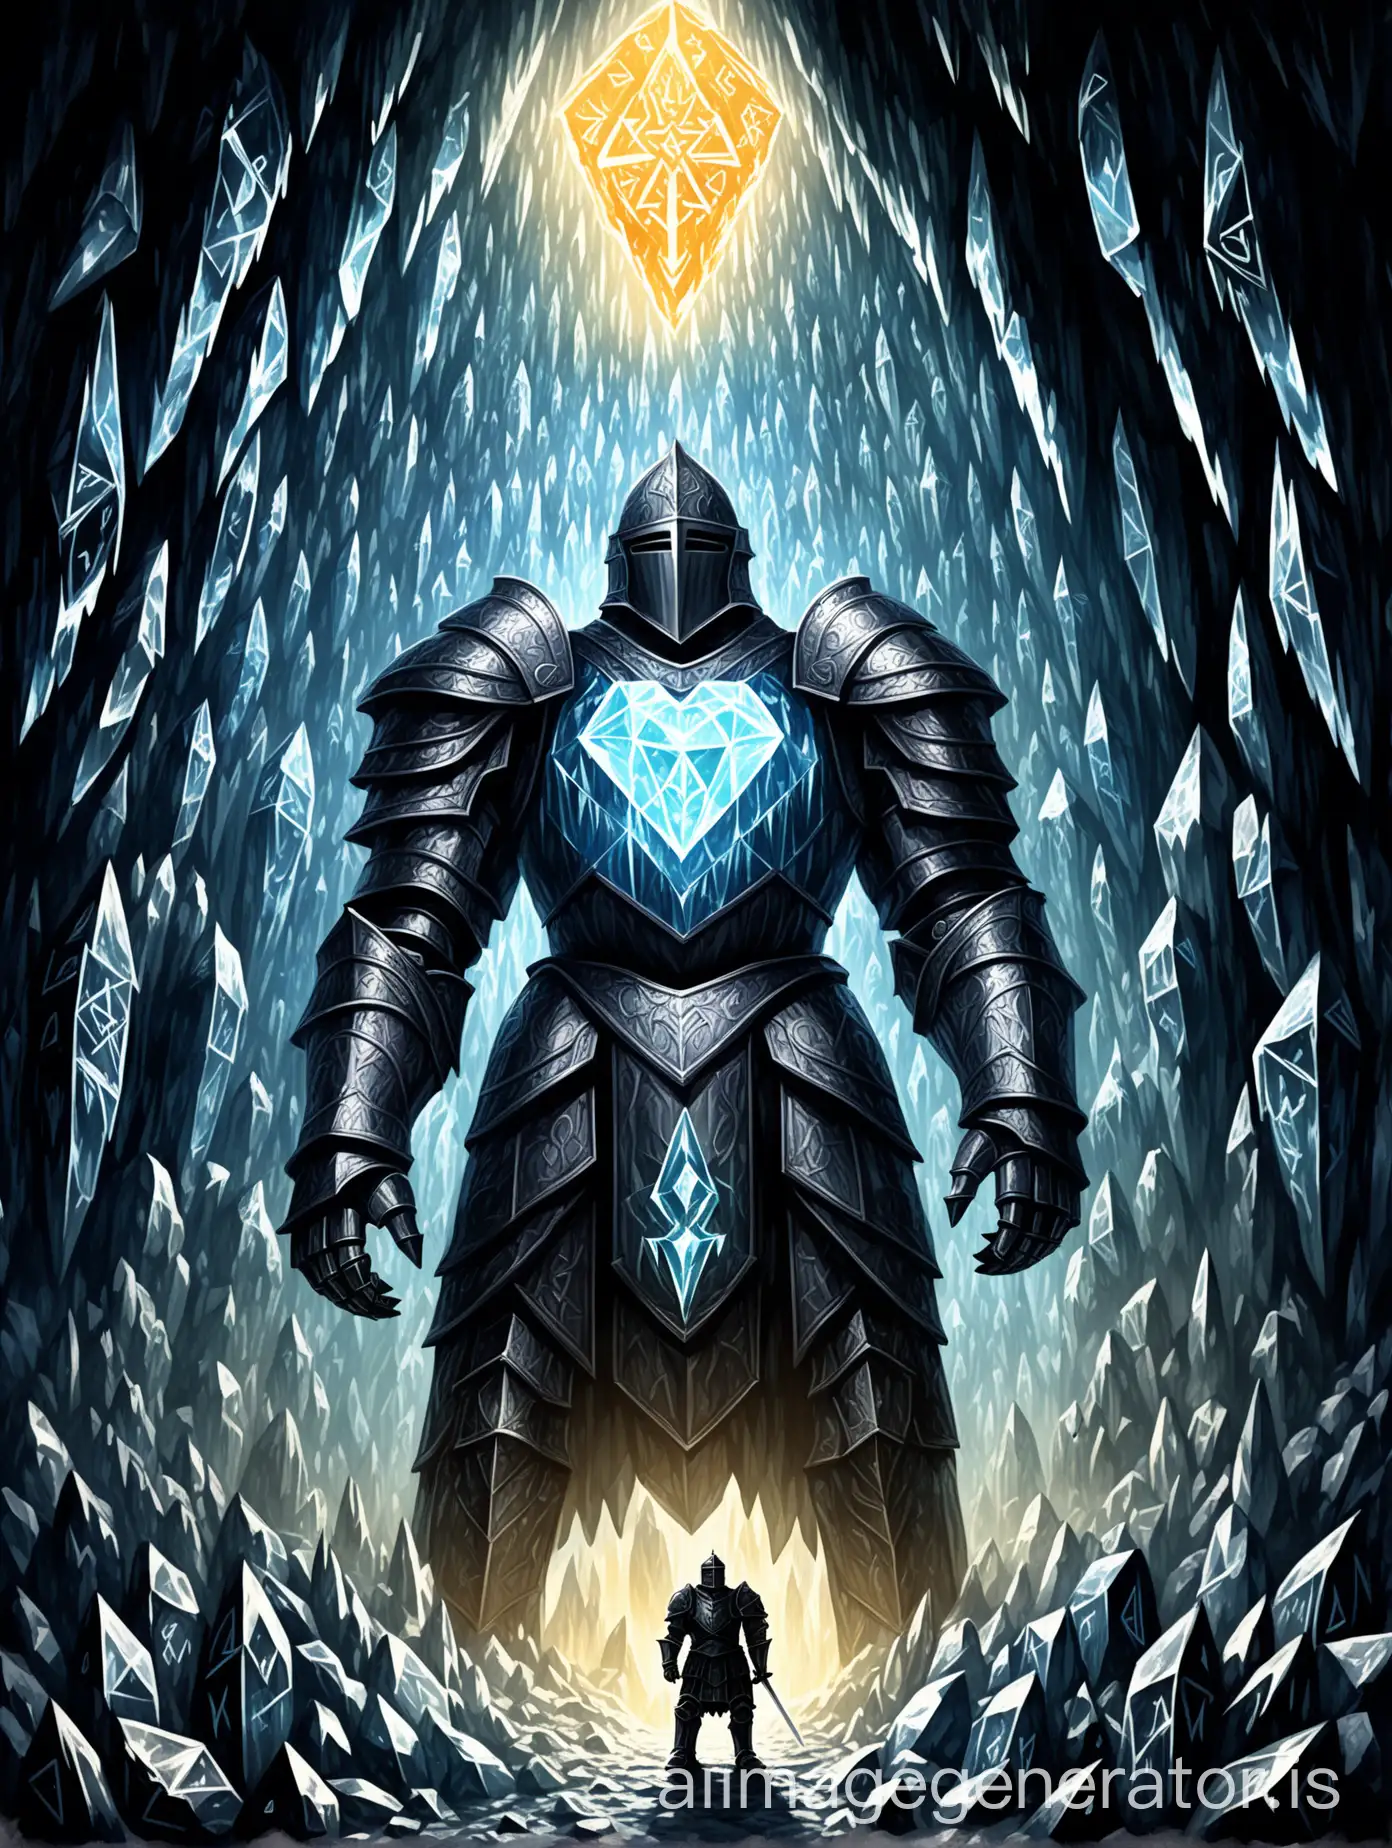 Produce an illustration of a stoic knight, surrounded by the radiant glow of ancient runes, facing down a massive, crystalline golem within the heart of a glittering crystal cave. The golem's facets gleam like diamonds as it looms over the knight, its immense form casting eerie shadows against the cavern walls